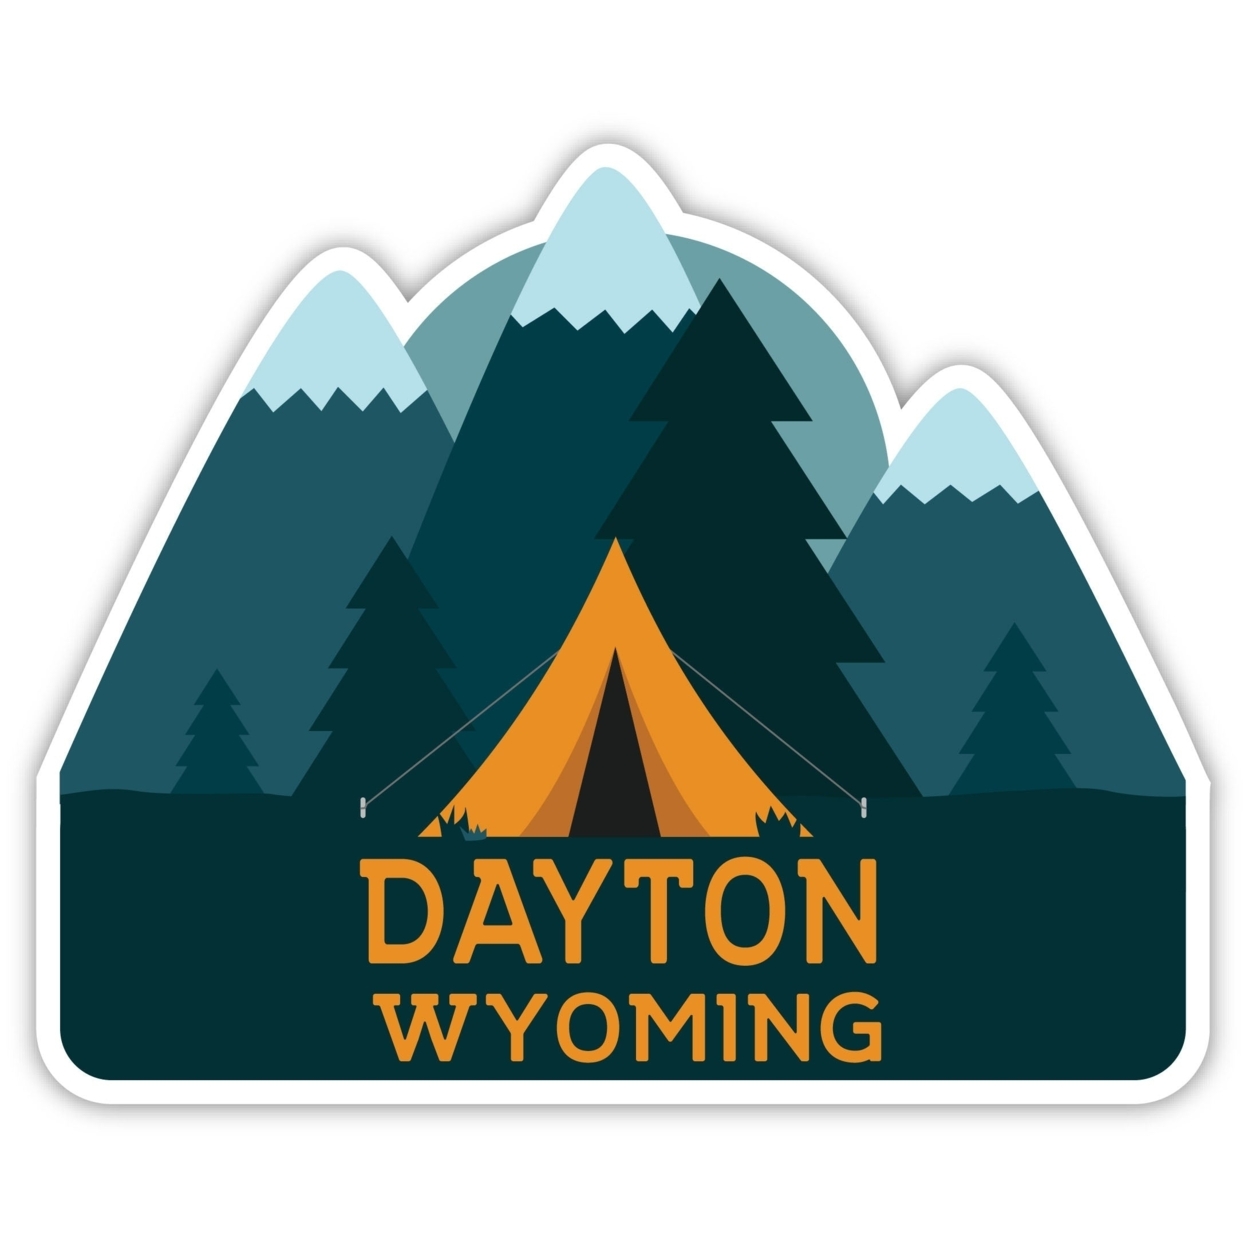 Dayton Wyoming Souvenir Decorative Stickers (Choose Theme And Size) - 4-Pack, 4-Inch, Tent